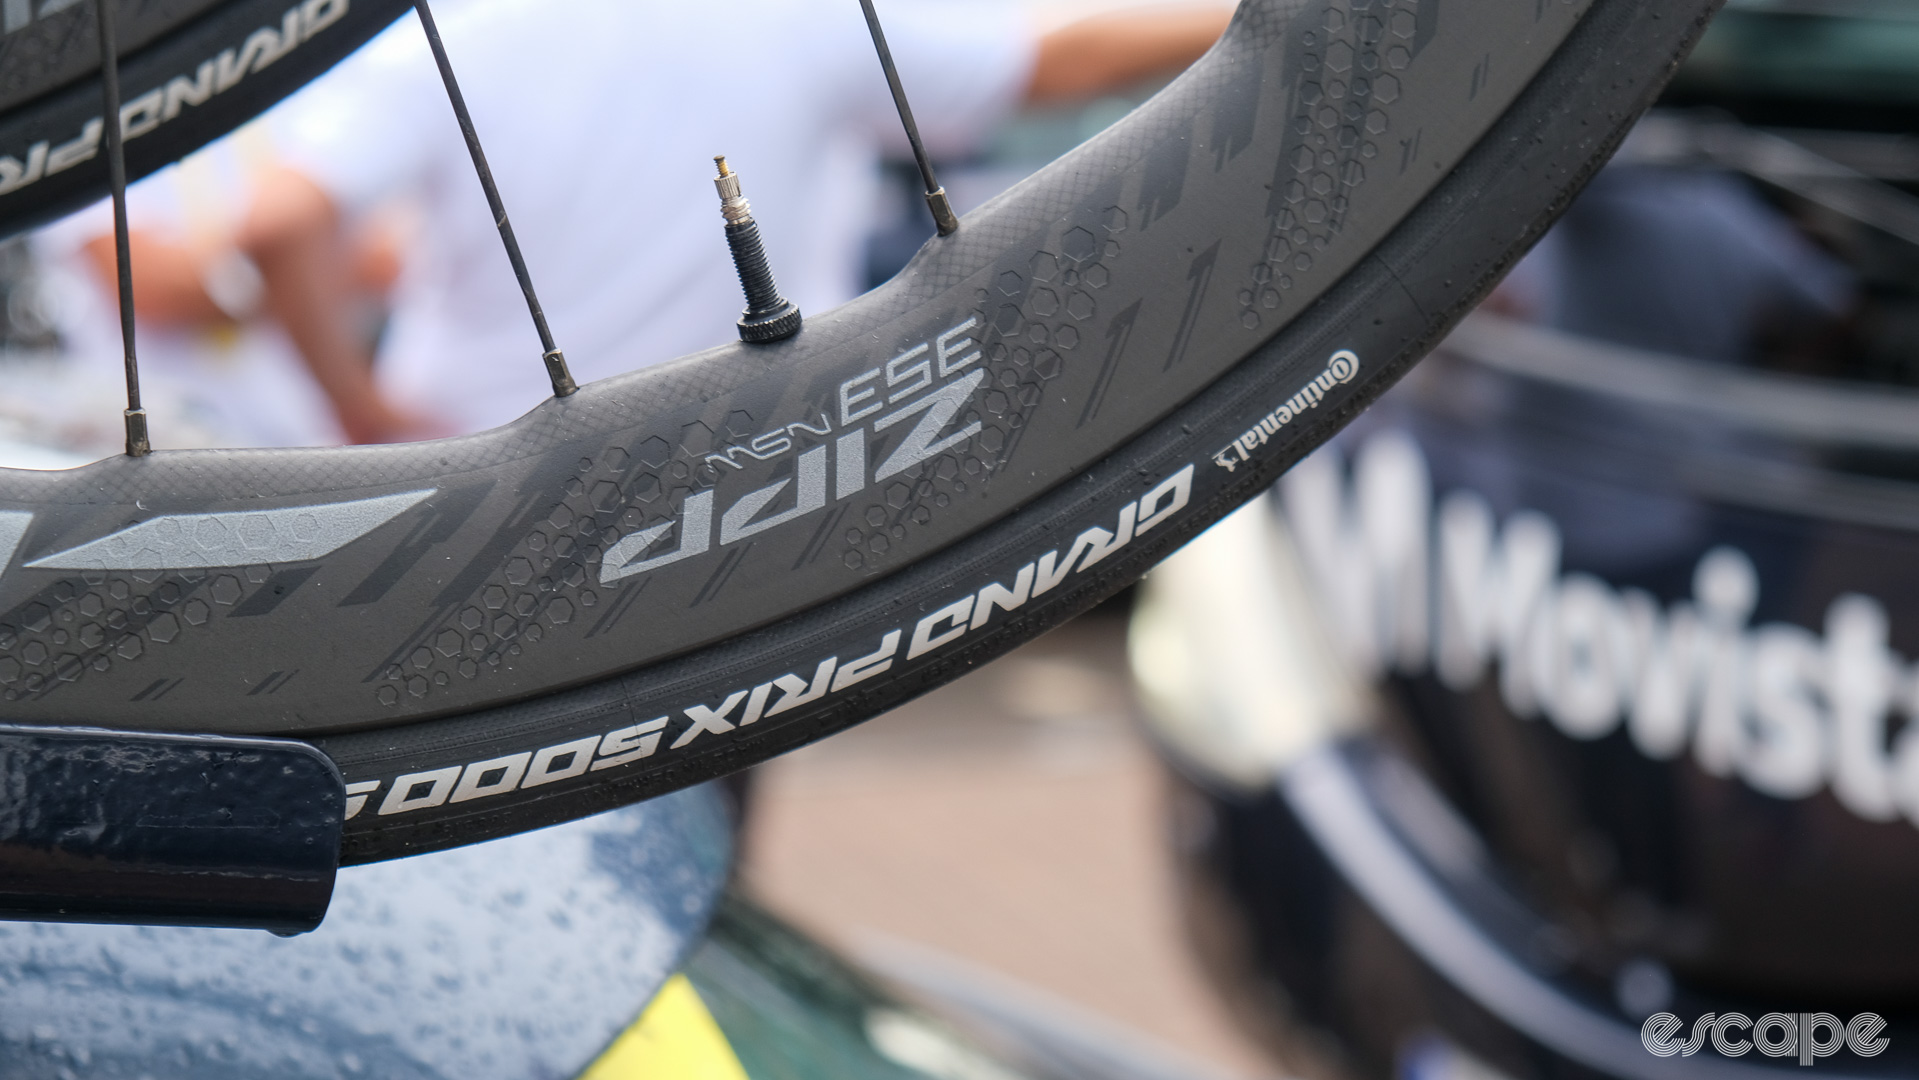 What we learned by measuring tyre widths at the Tour de France Escape